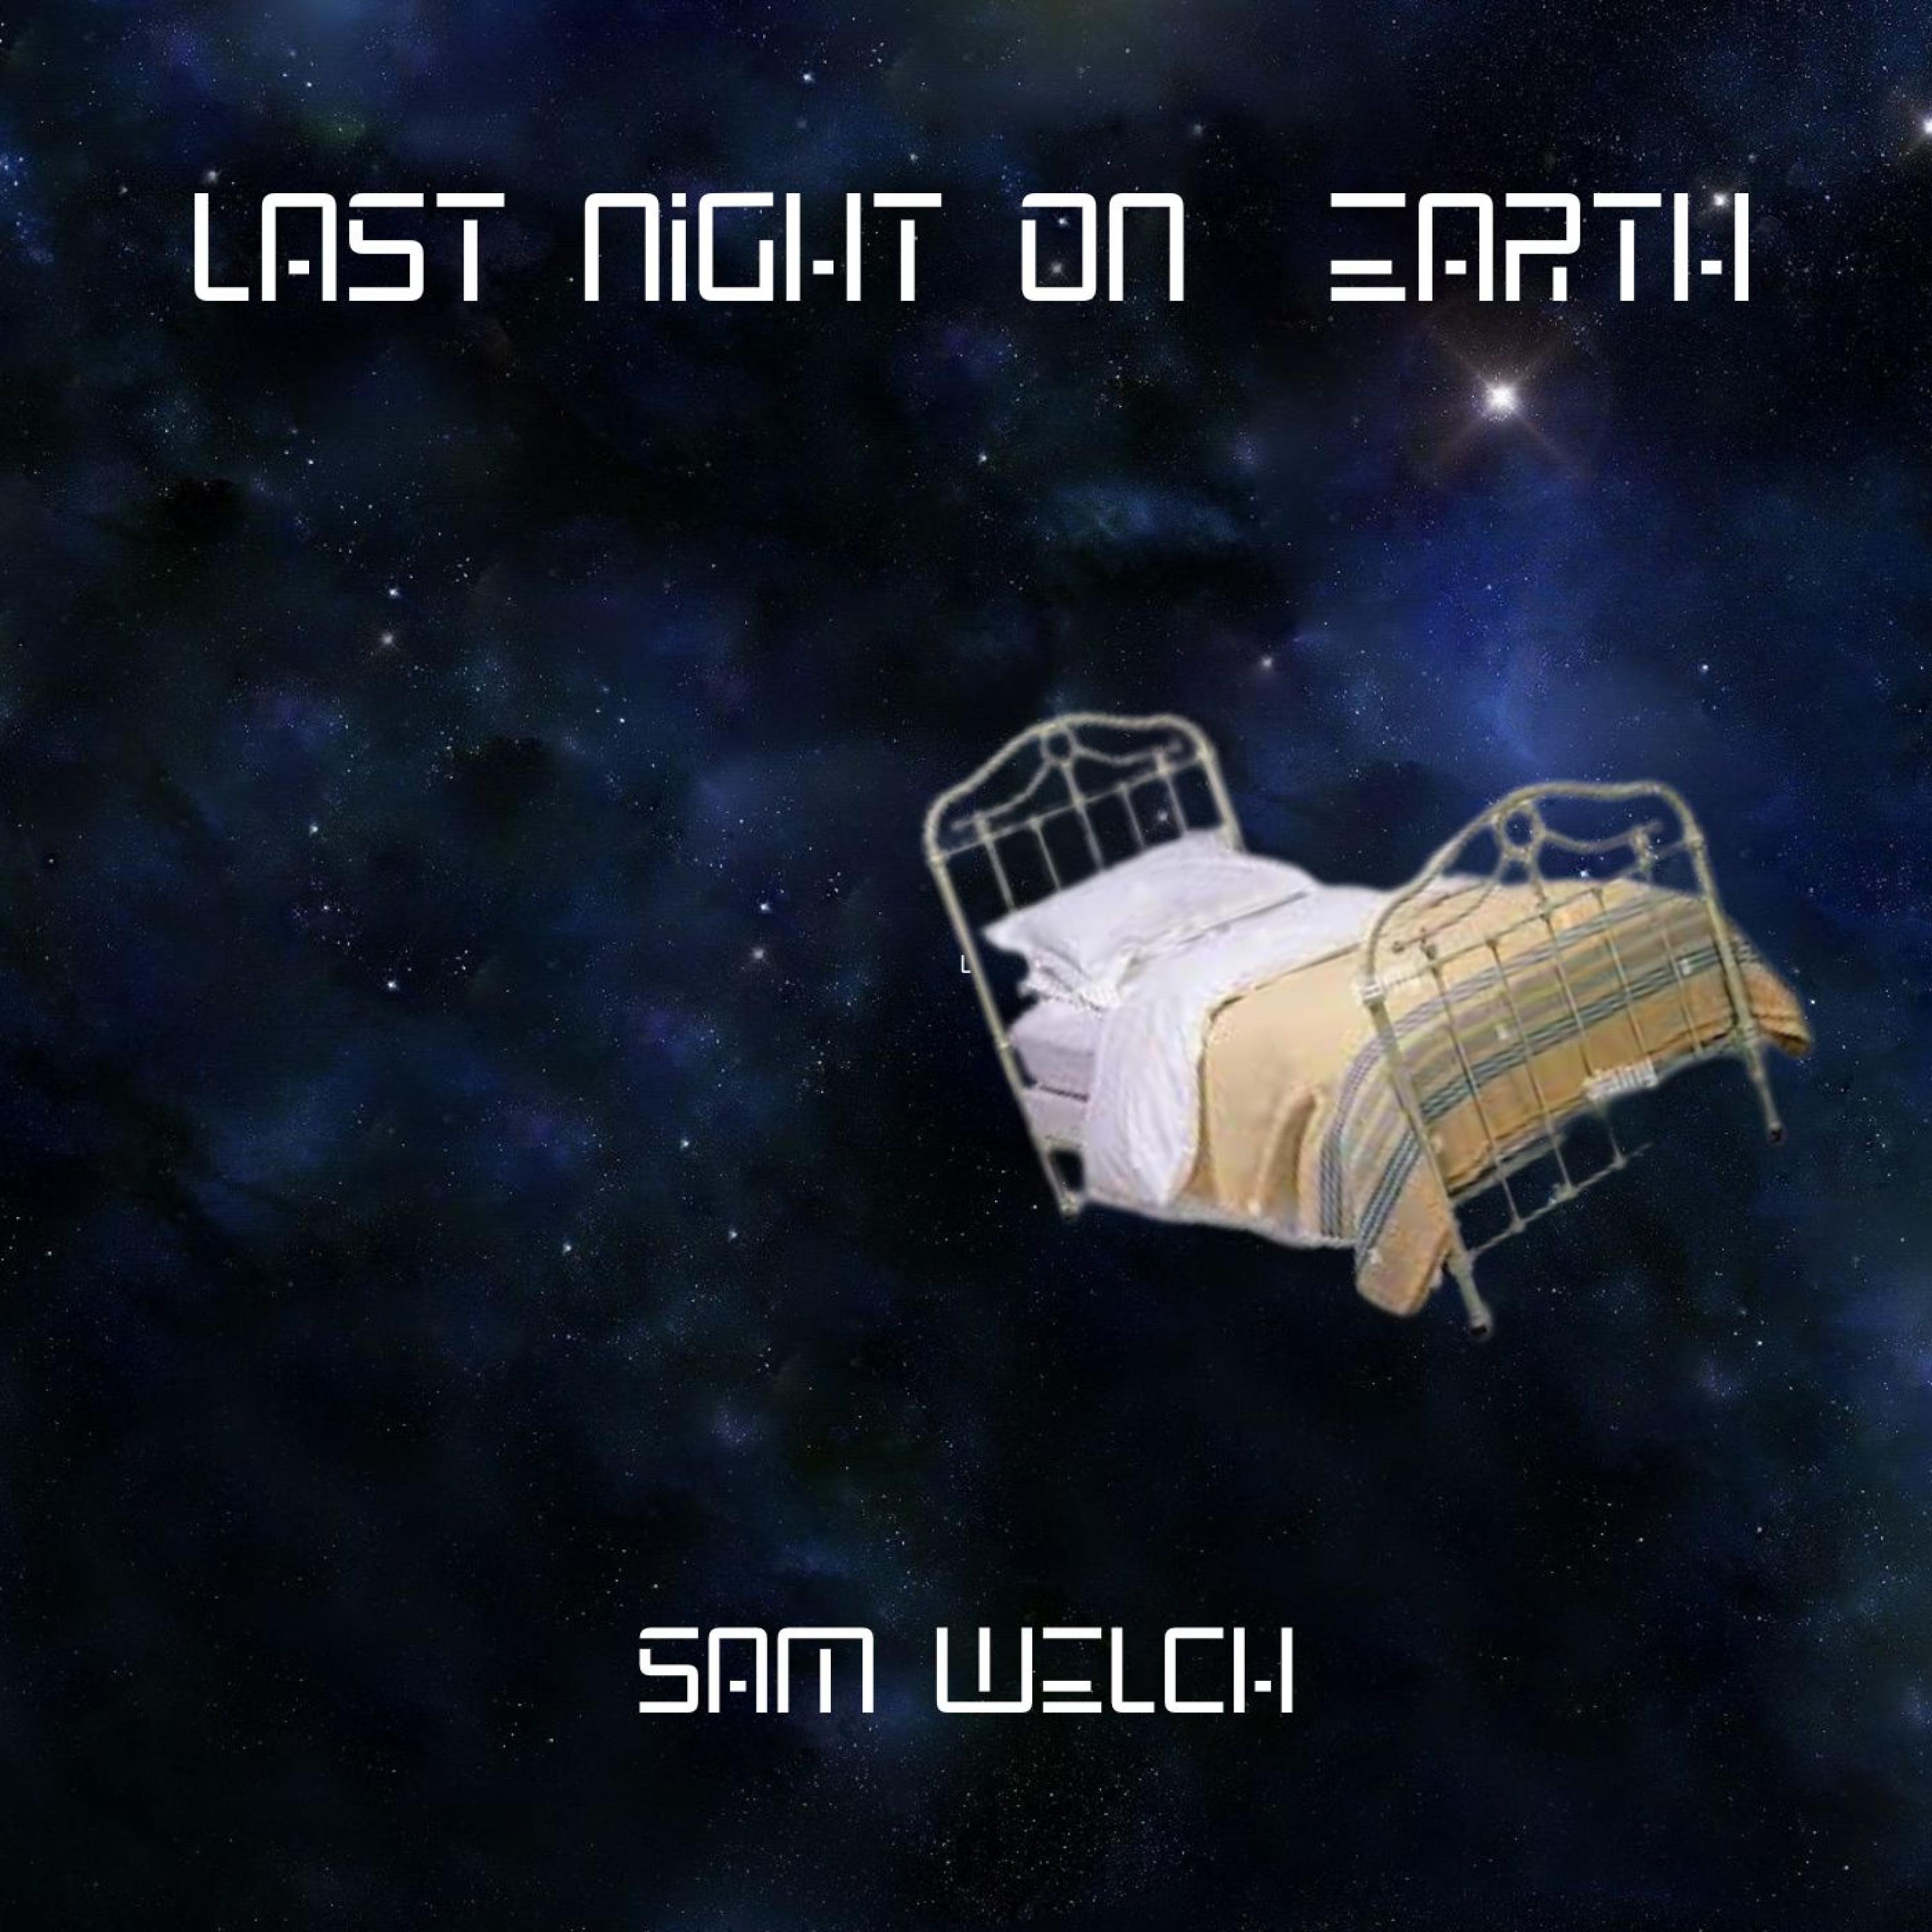 Sam Welch - Prepare To Be Transported